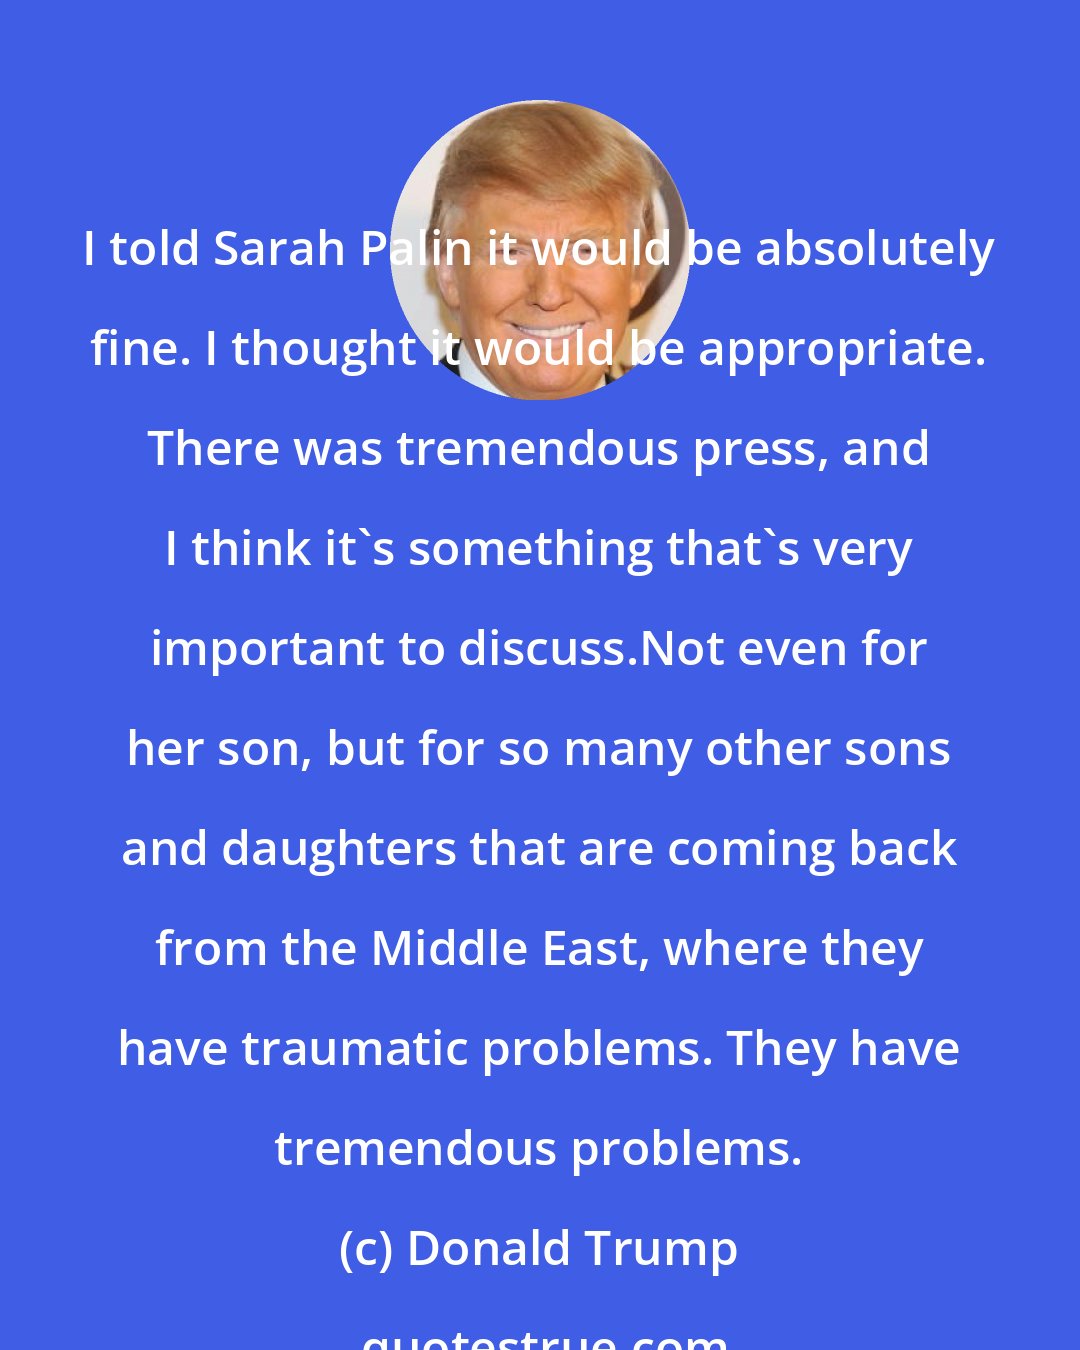 Donald Trump: I told Sarah Palin it would be absolutely fine. I thought it would be appropriate. There was tremendous press, and I think it`s something that`s very important to discuss.Not even for her son, but for so many other sons and daughters that are coming back from the Middle East, where they have traumatic problems. They have tremendous problems.